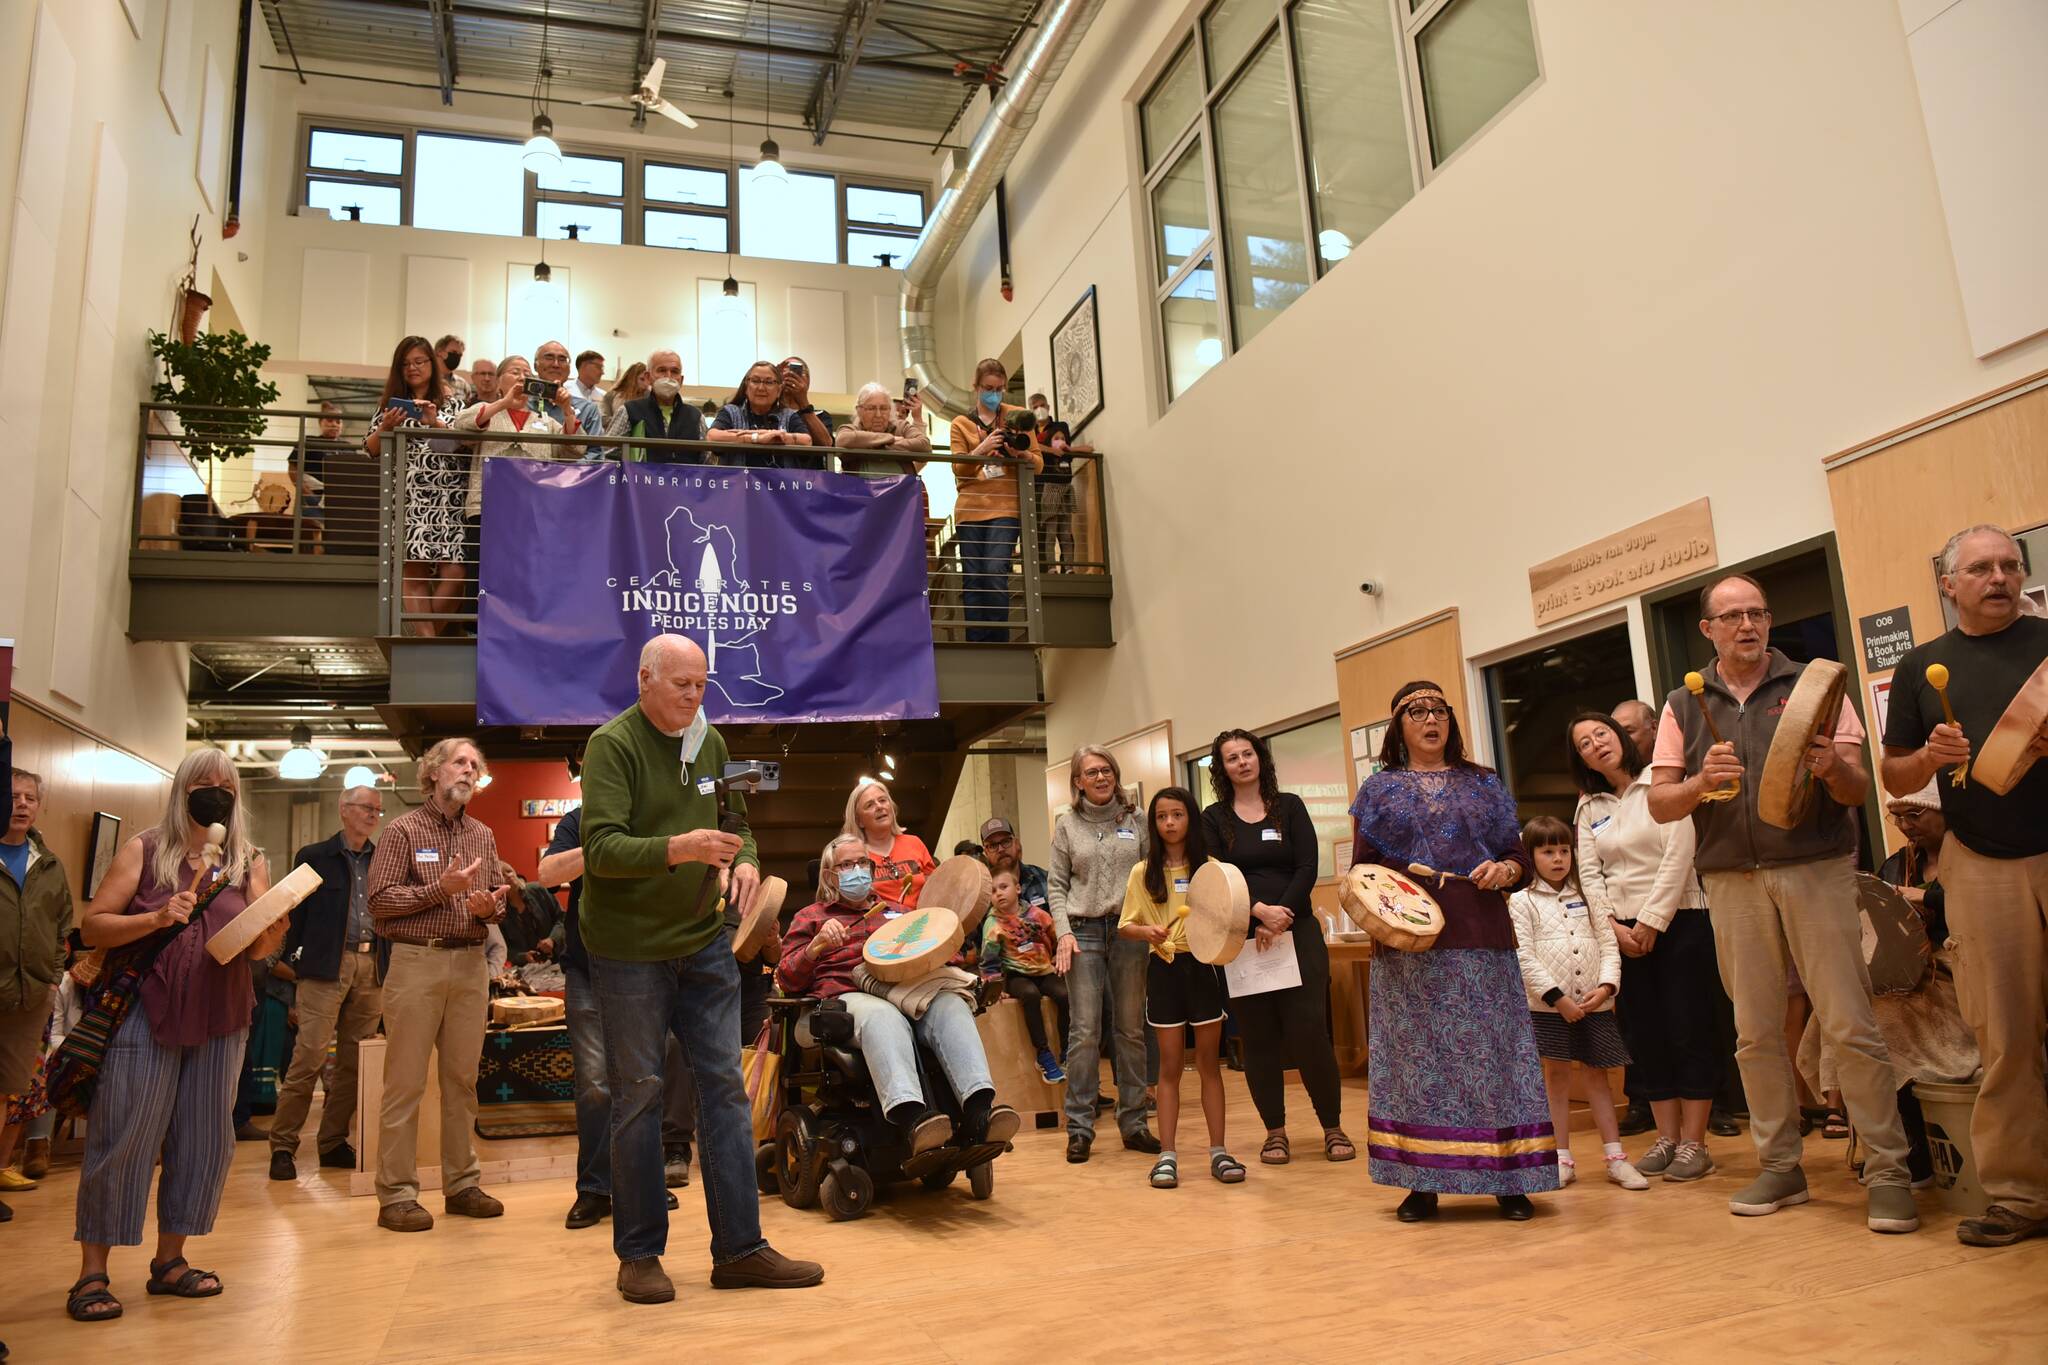 Bainbridge Island community members and tribal members of the BI Indipino Community, the Suquamish Tribe and the Squamish Nation in British Columbia gather and perform a welcome song with handmade traditional drums at BARN to celebrate Indigenous People’s Day Oct. 10. Nancy Treder/Kitsap News Group Photos